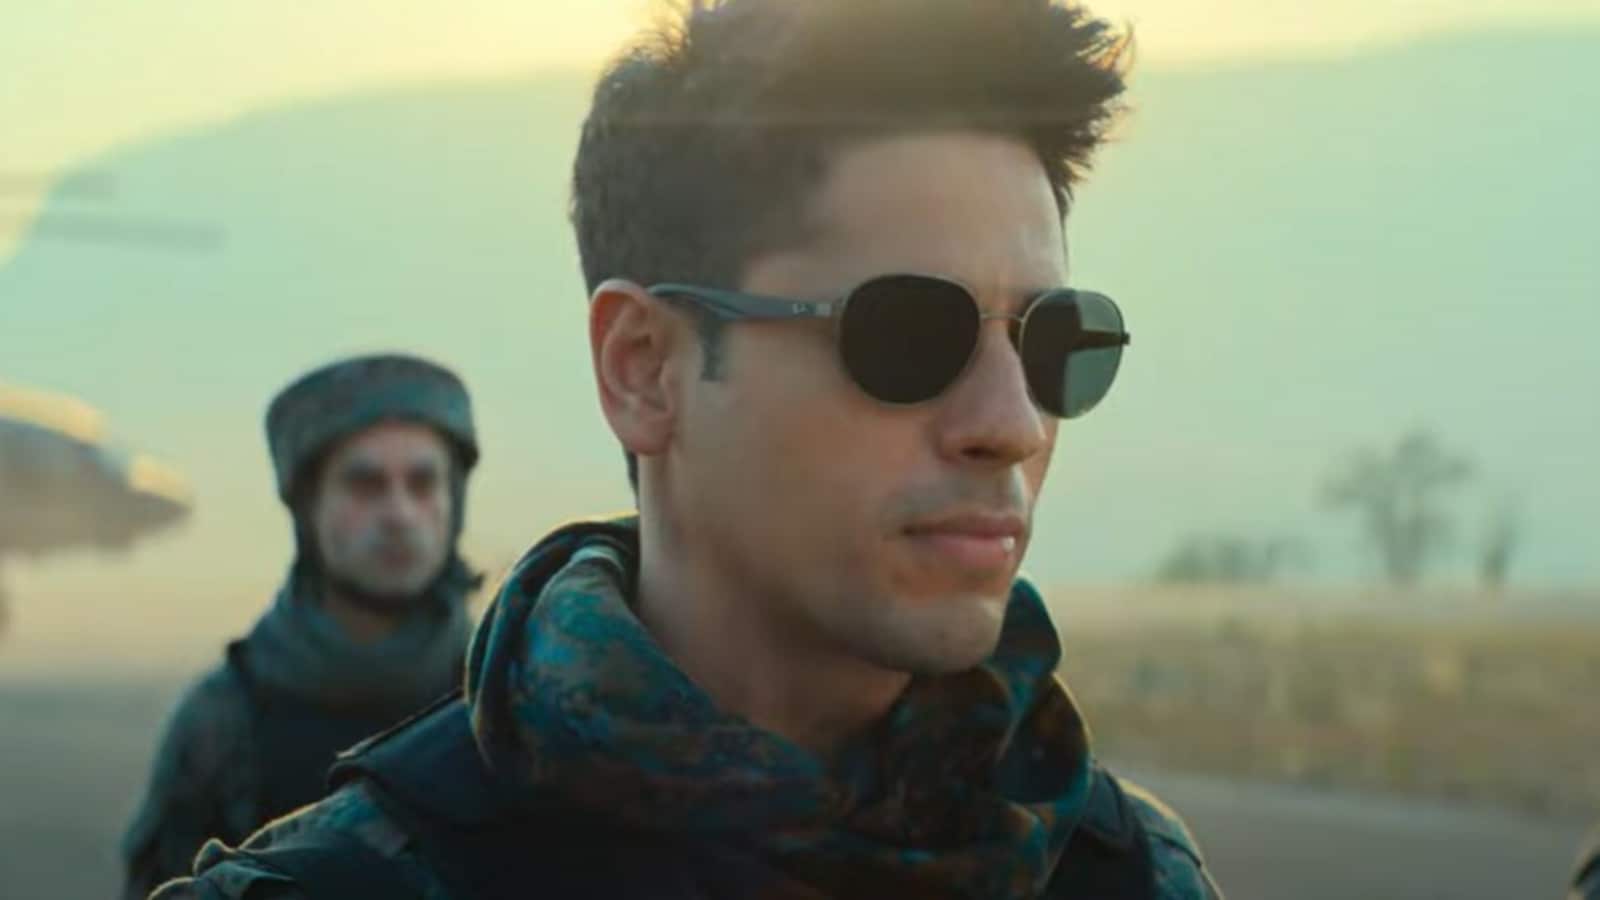 Yodha trailer: Sidharth Malhotra's 'crazy Indian soldier' is on deadly mission to prove he is not a 'traitor'. Watch